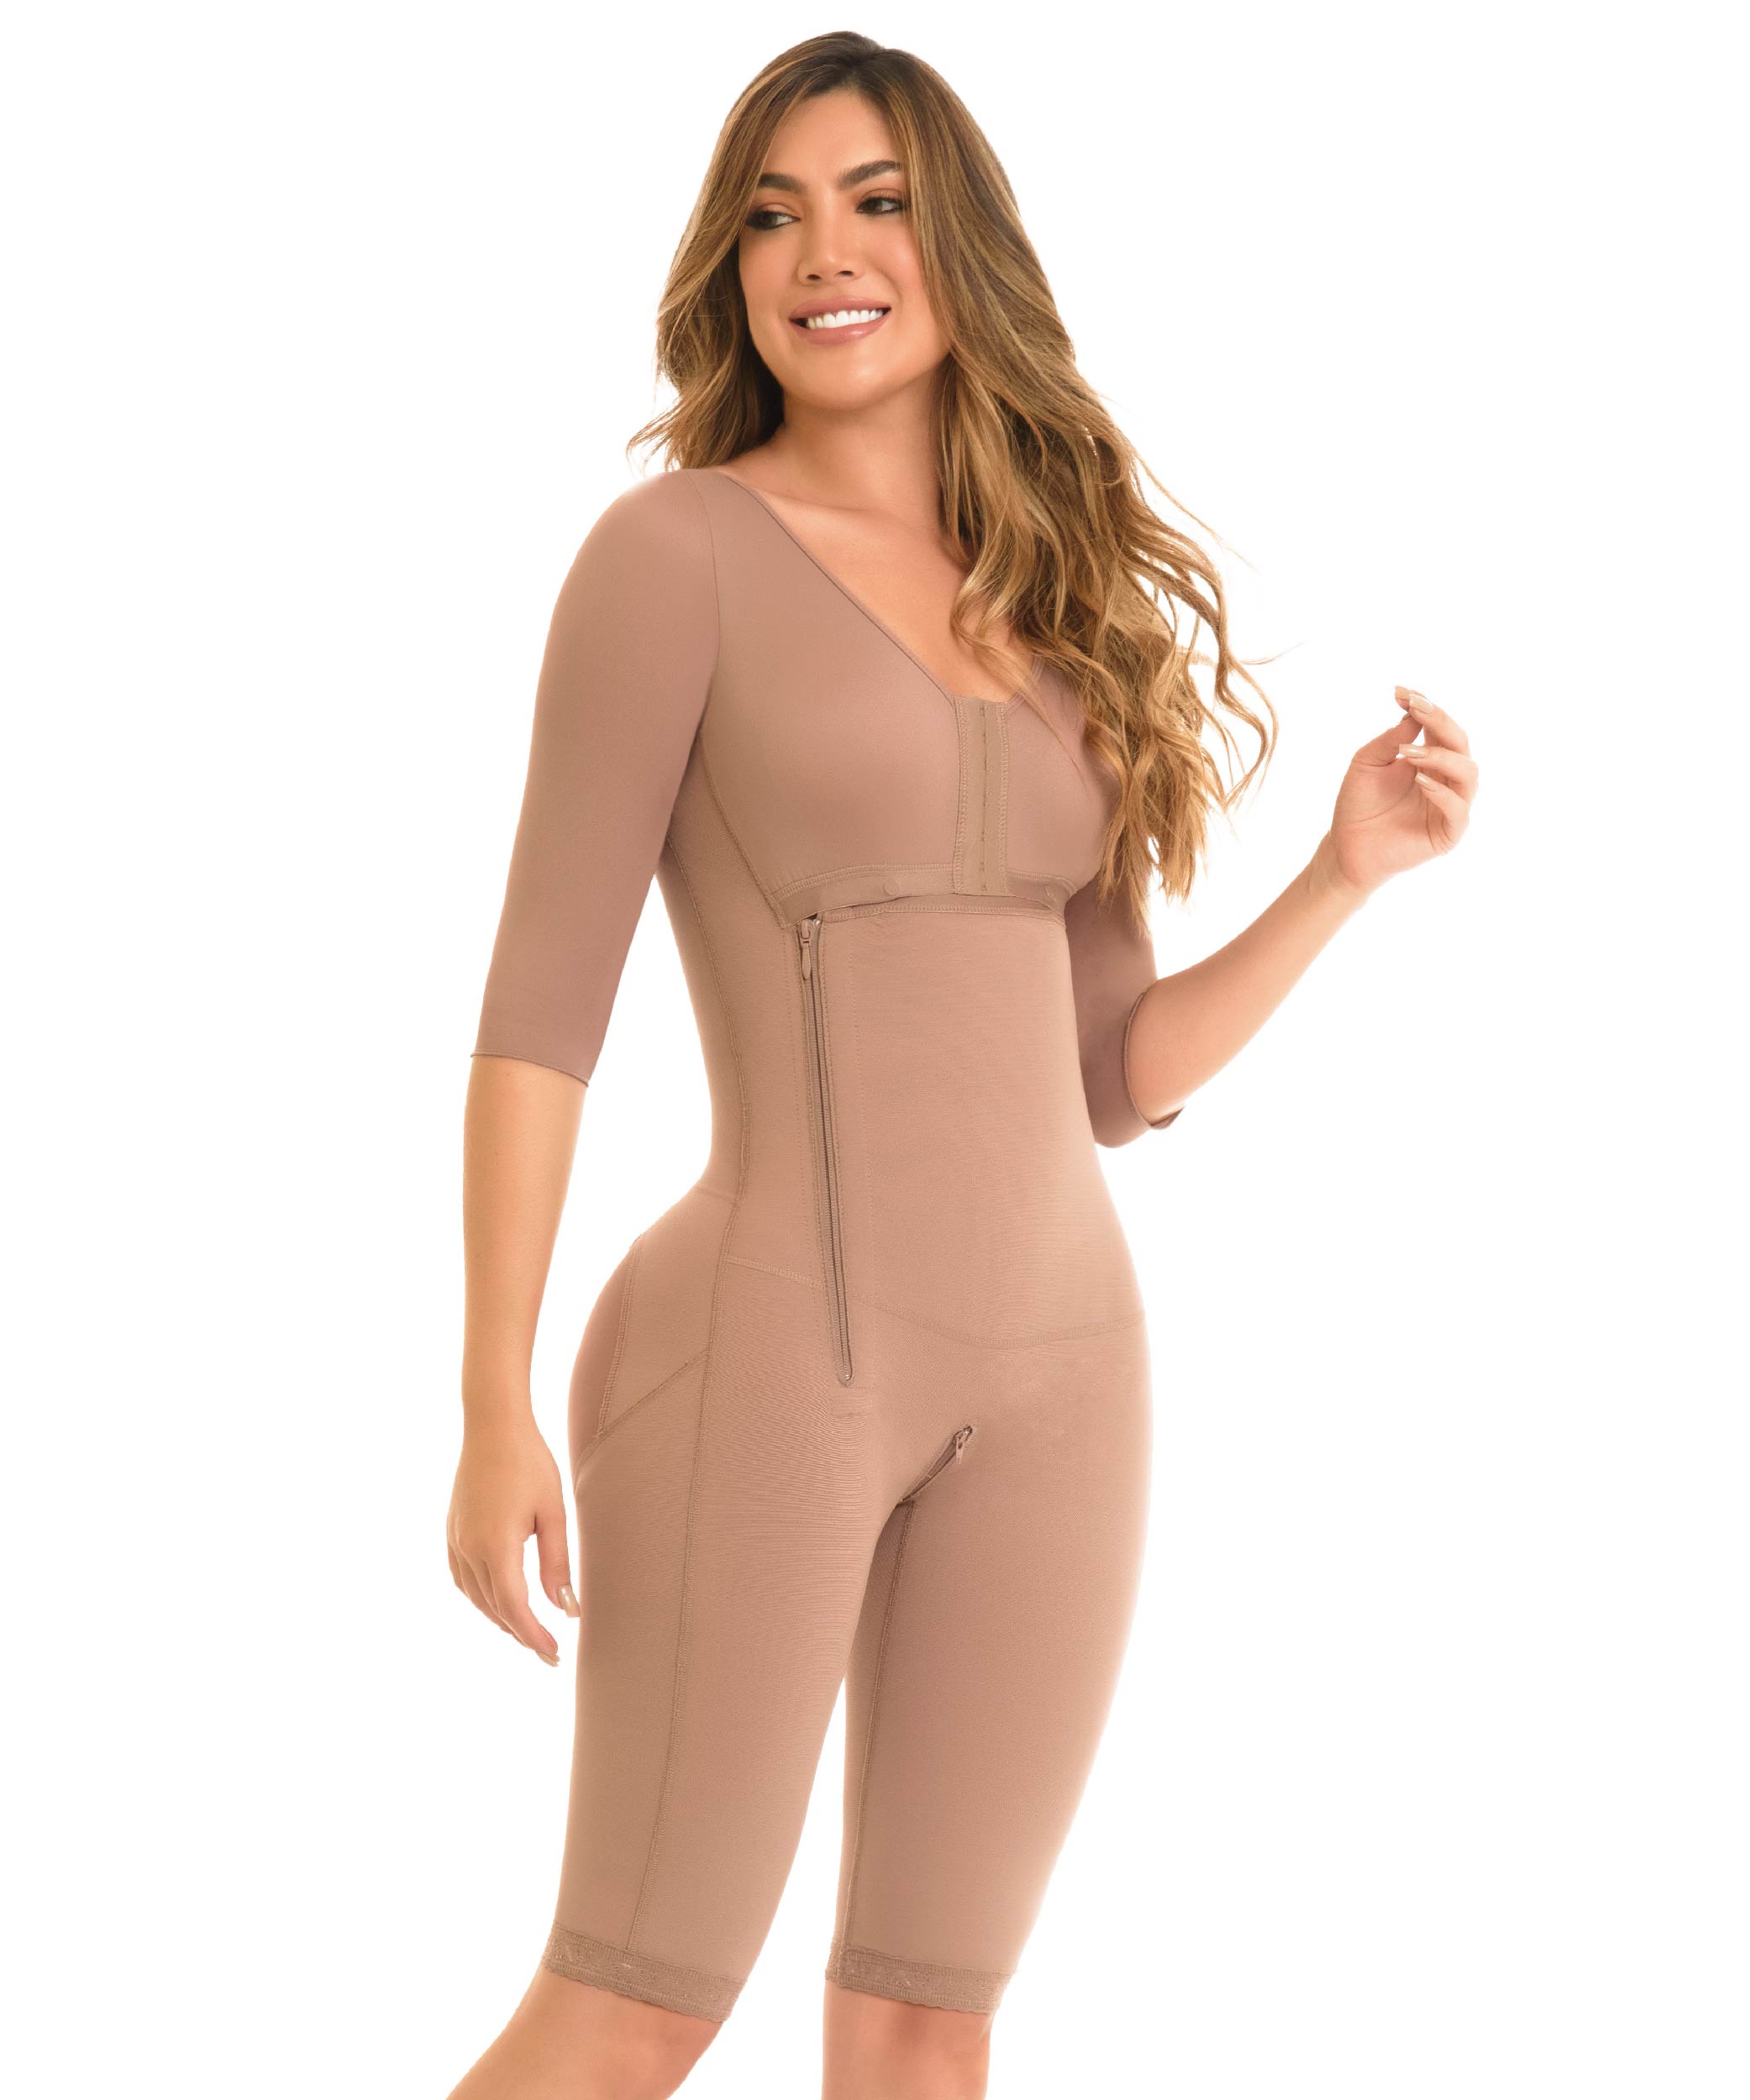 Enhance Your Curves with Delie Fajas High Compression Strapless Girdle Hip  Hugger!